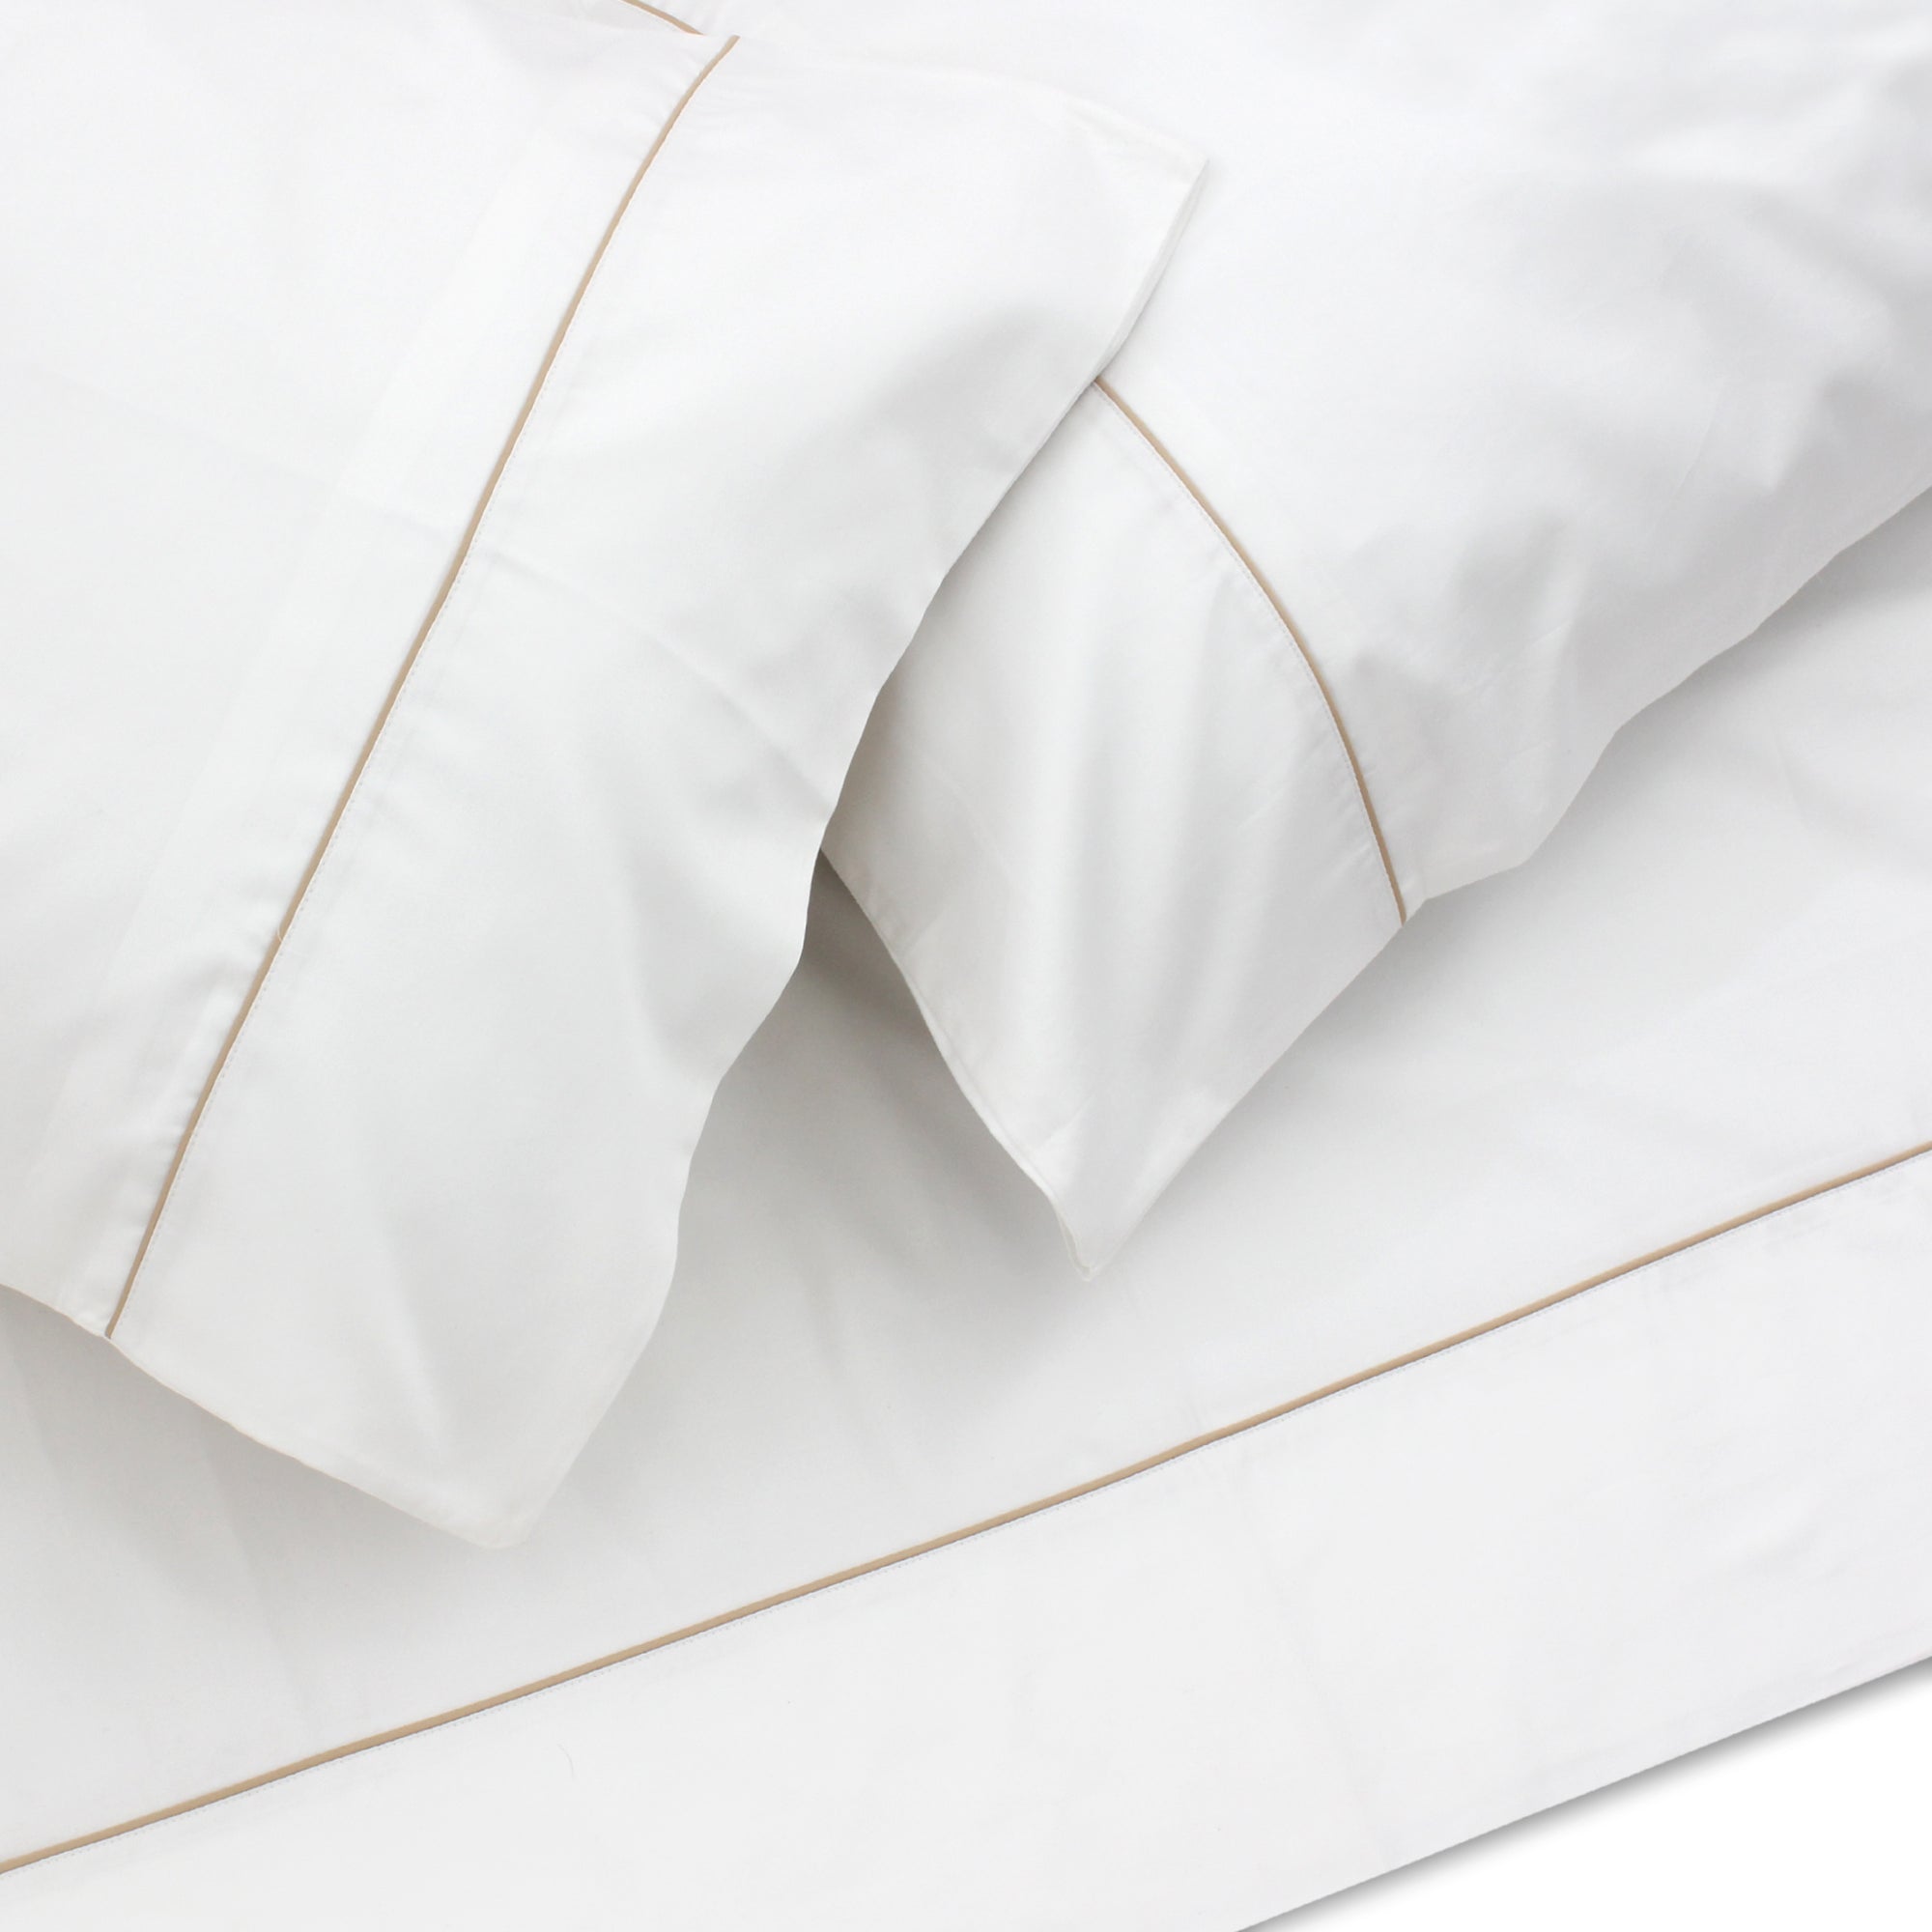 White Sheet with Beige Piping + Pillowcases (600 TC)